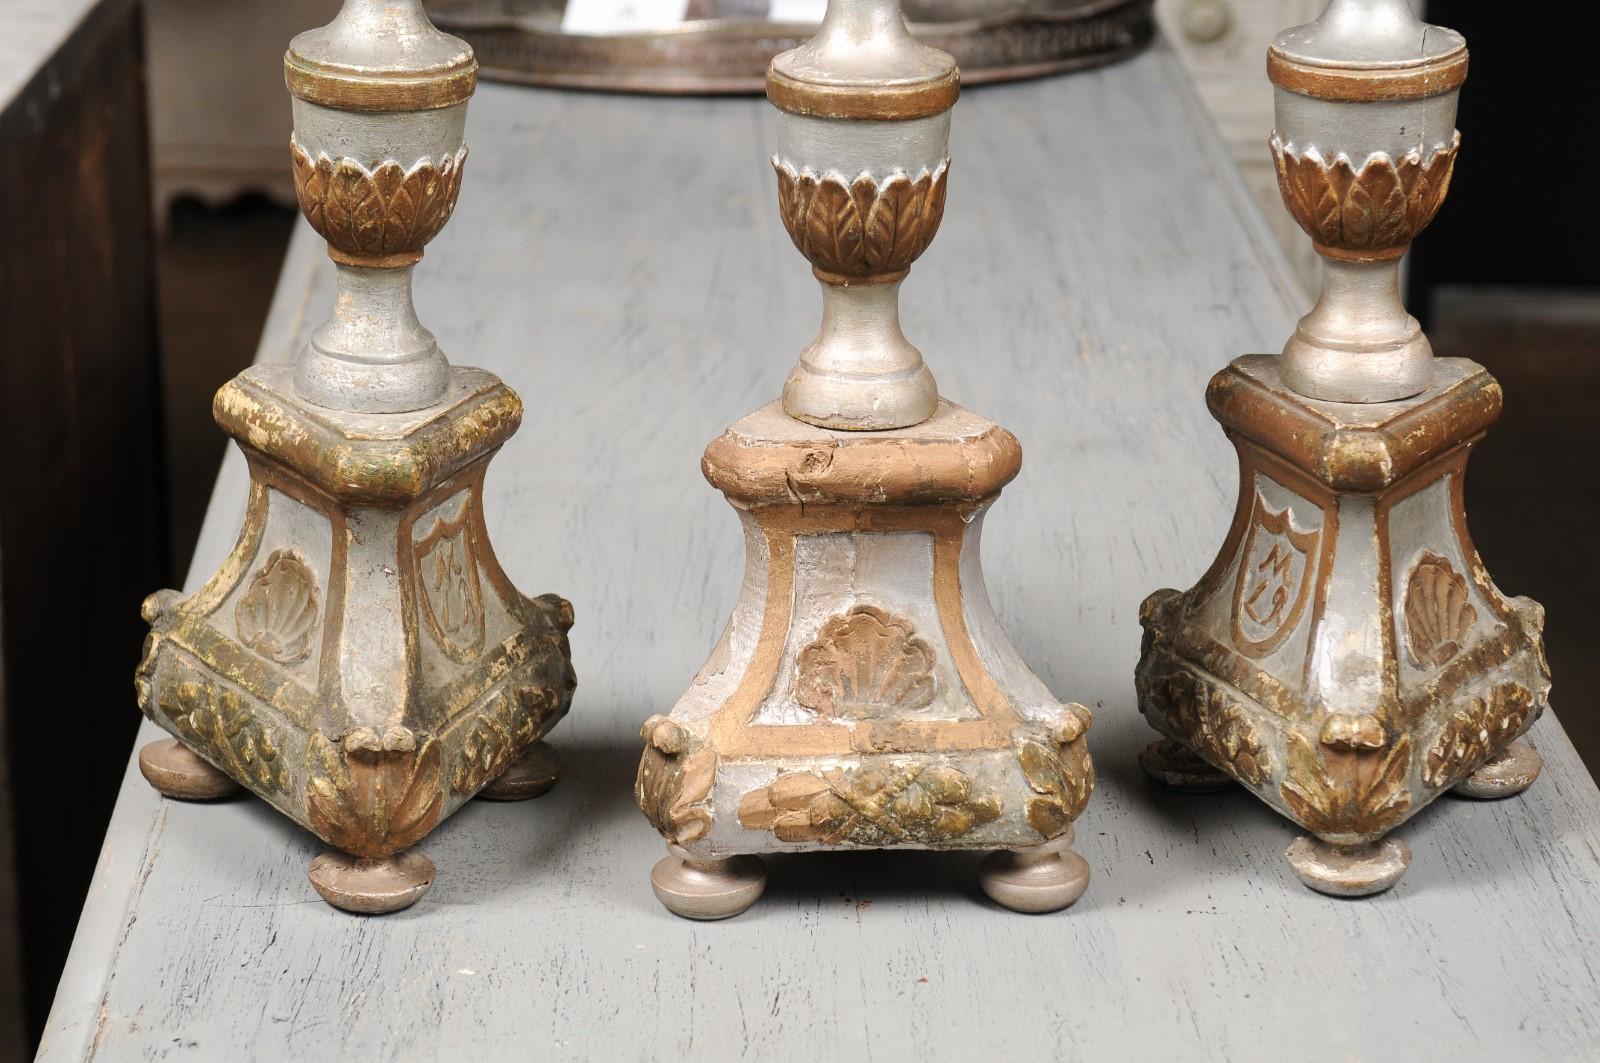 Italian 18th Century Silver Gilt Candlesticks with Painted and Carved Motifs 2